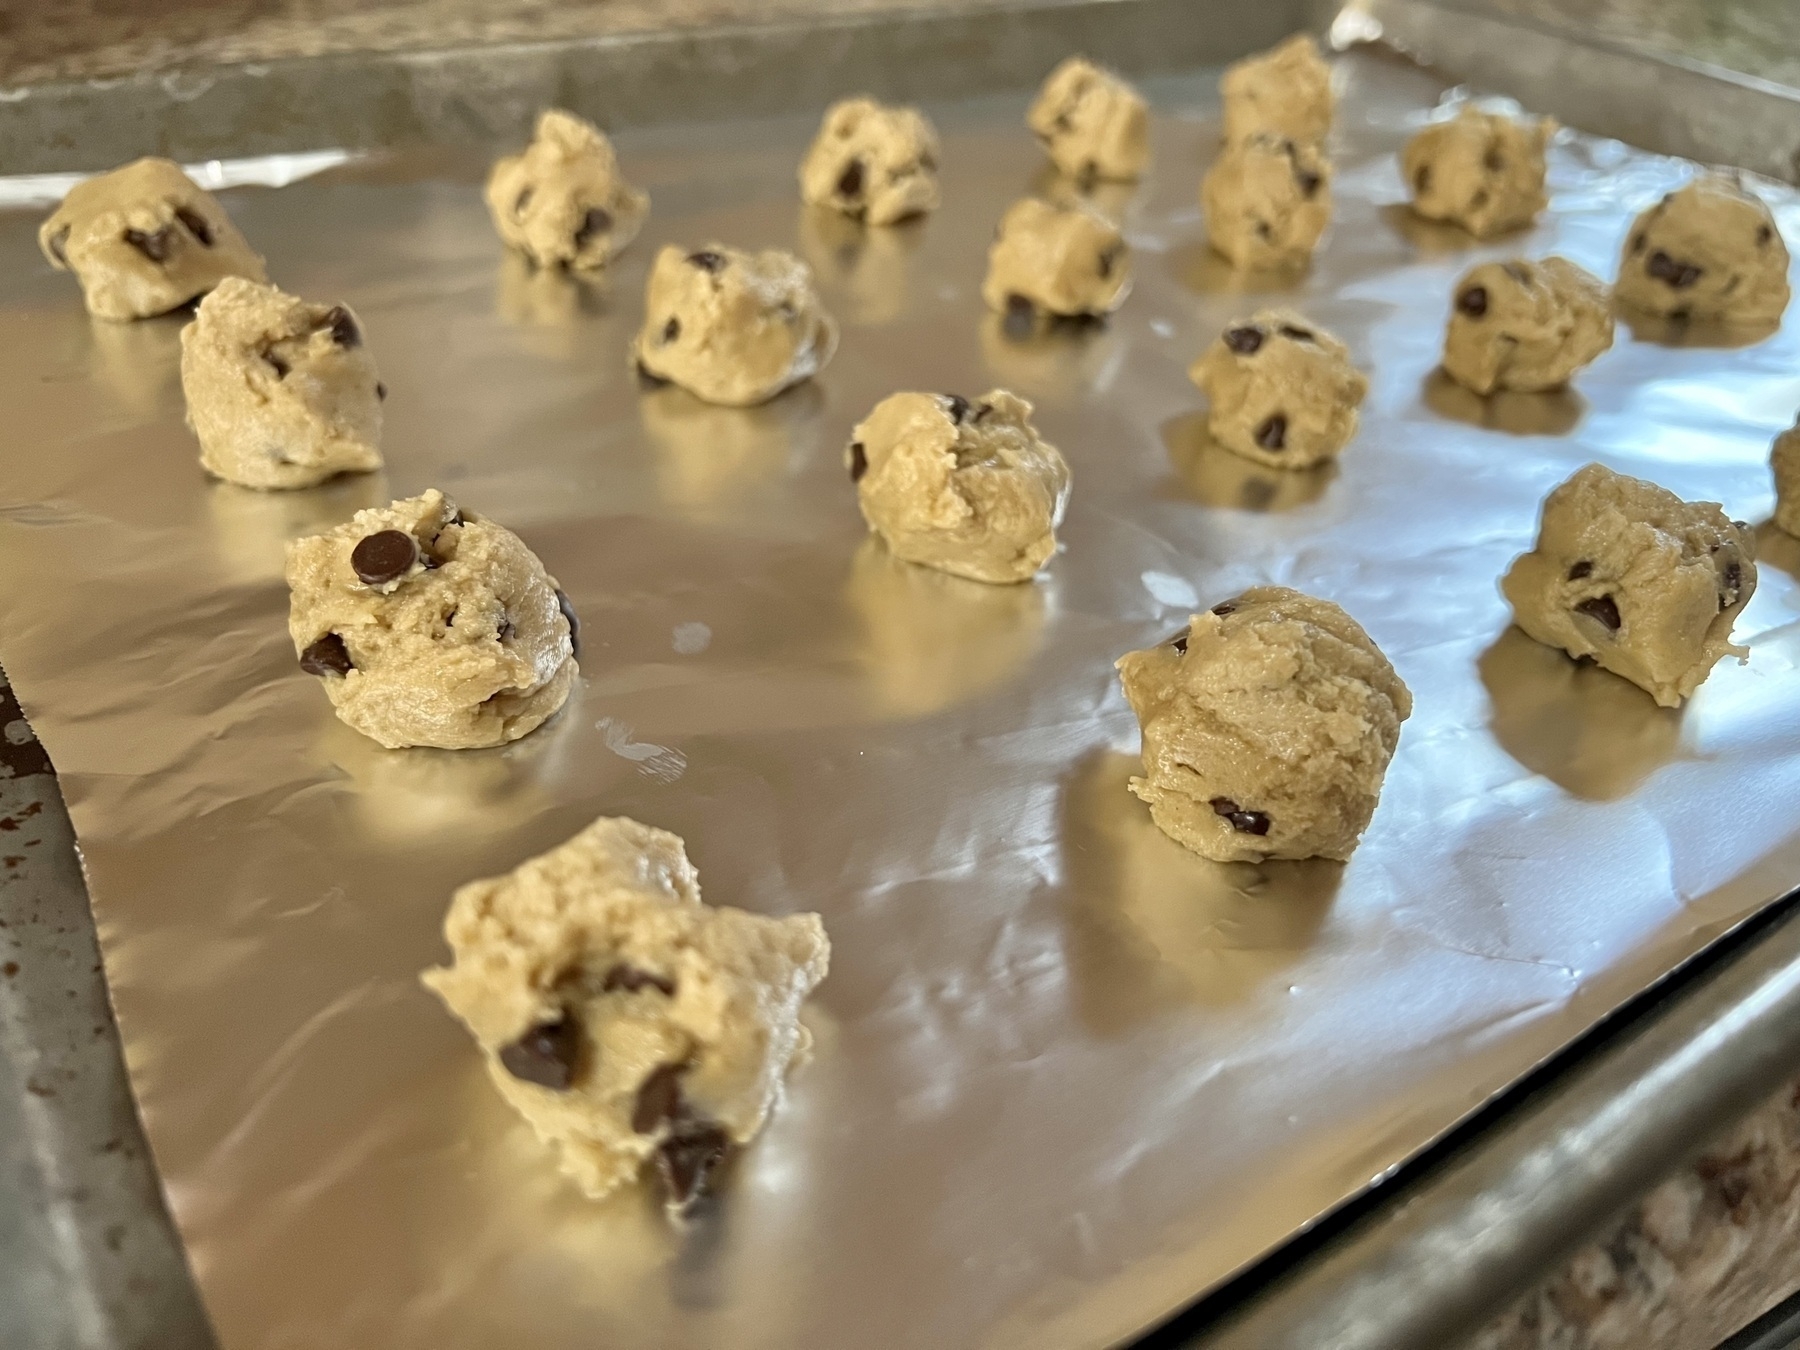 Rows of raw cookie dough on a baking sheet, before going into the oven.